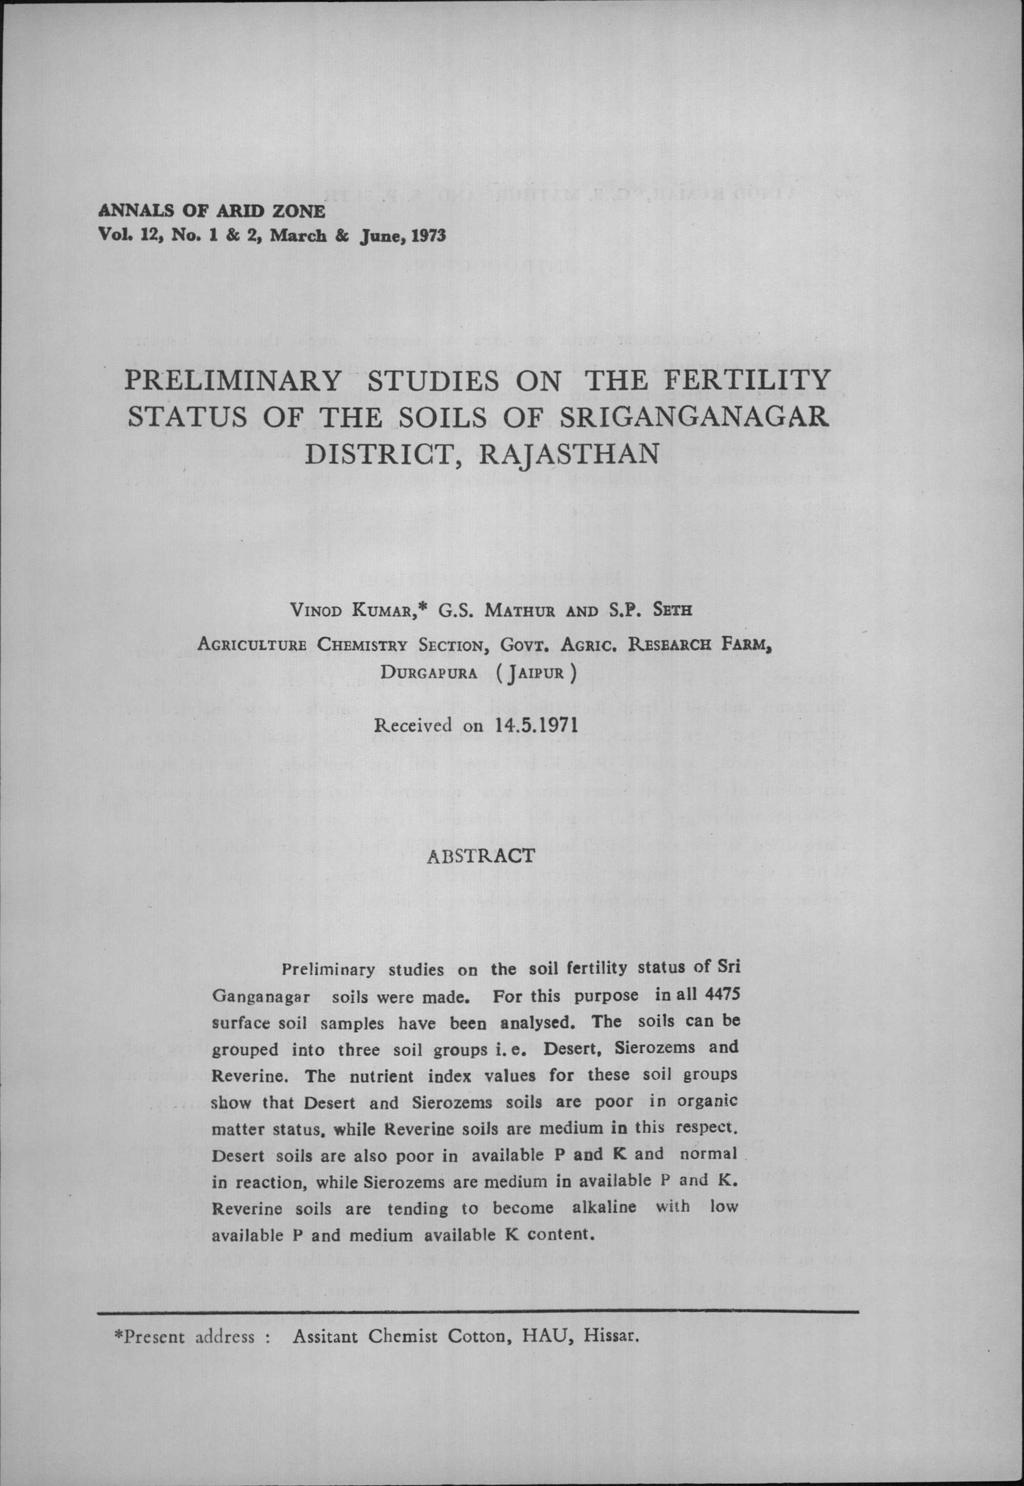 ANNALS 01' ARID zone VoL 12, No.1 & 2, March & Jane, 1973 PRELIMINARY STUDIES ON THE FERTILITY STATUS OF THE SOILS OF SRIGANGANAGAR DISTRICT, RAJASTHAN VINOD KUMAR, G.S. MATHUR AND S.P. SBTH AGRICULTURE CHEMISTRY SECTION, GOVT.